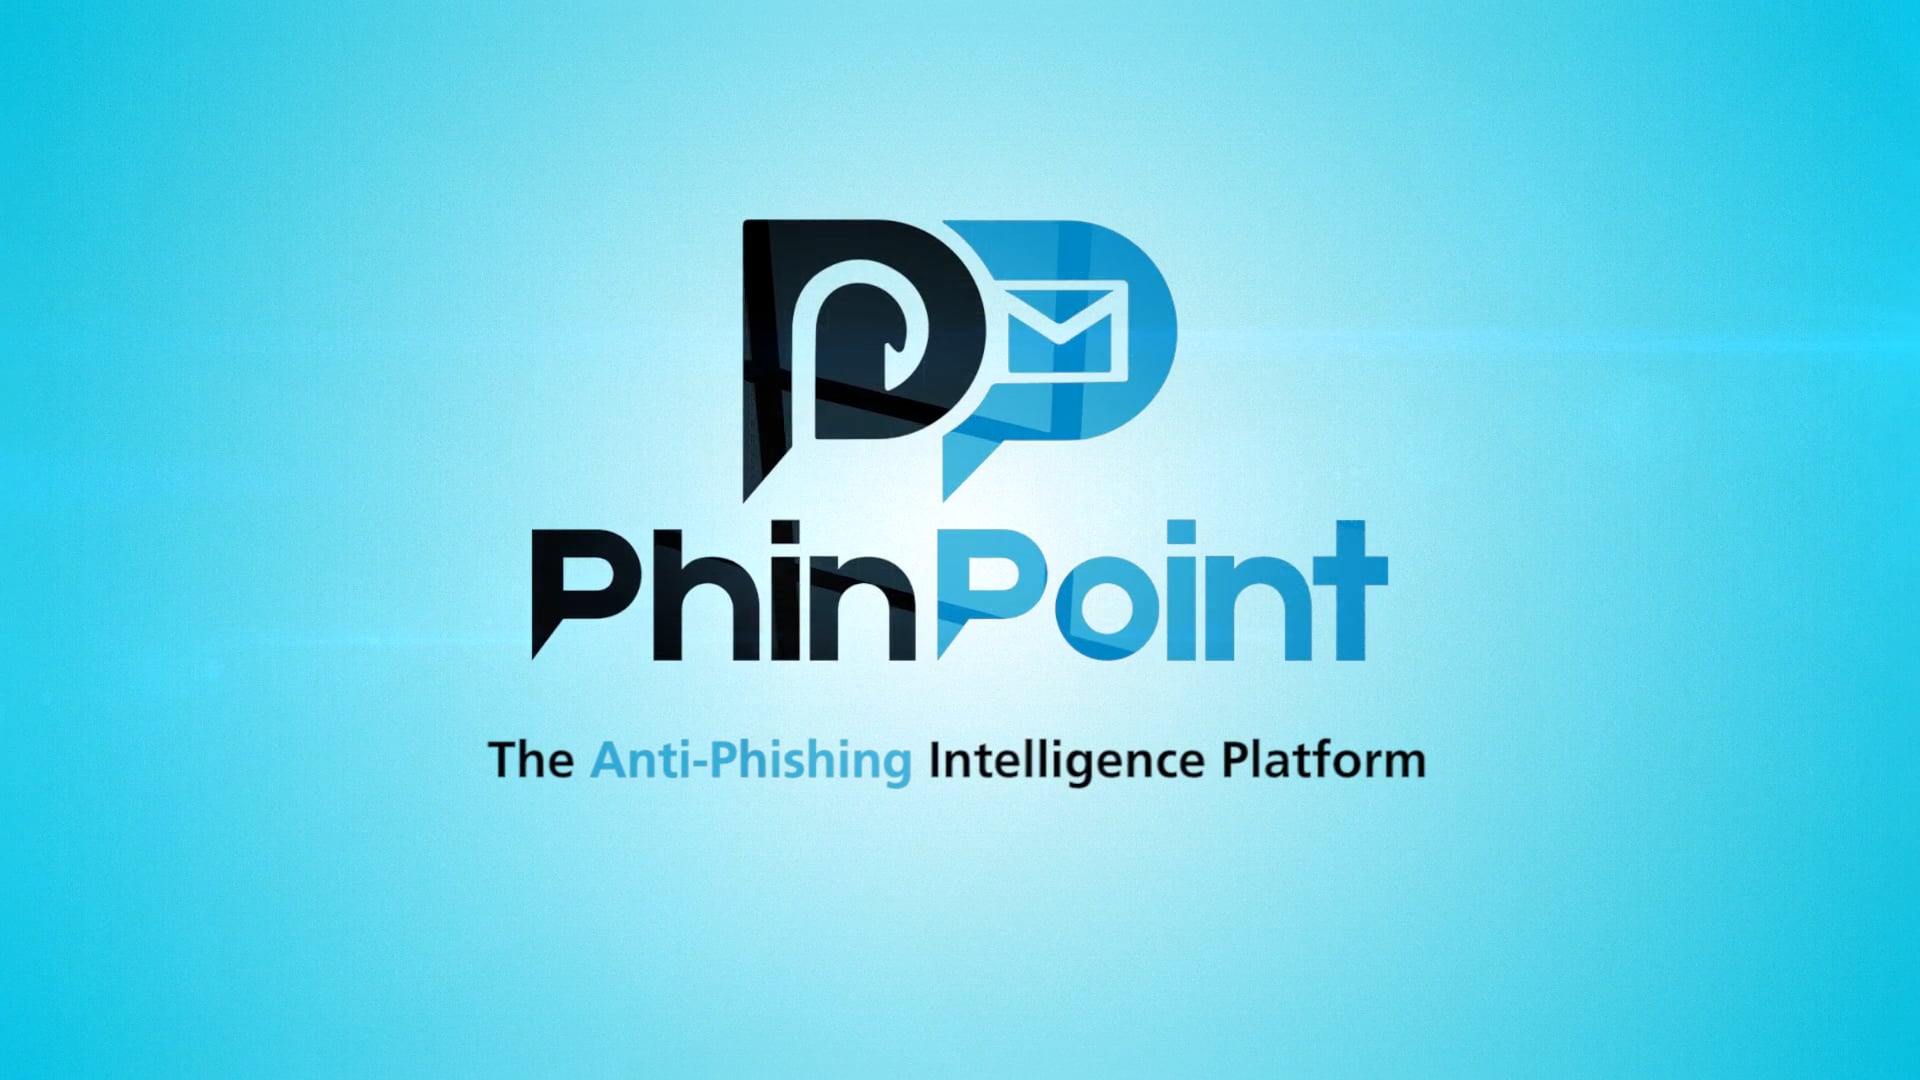 PhinPoint